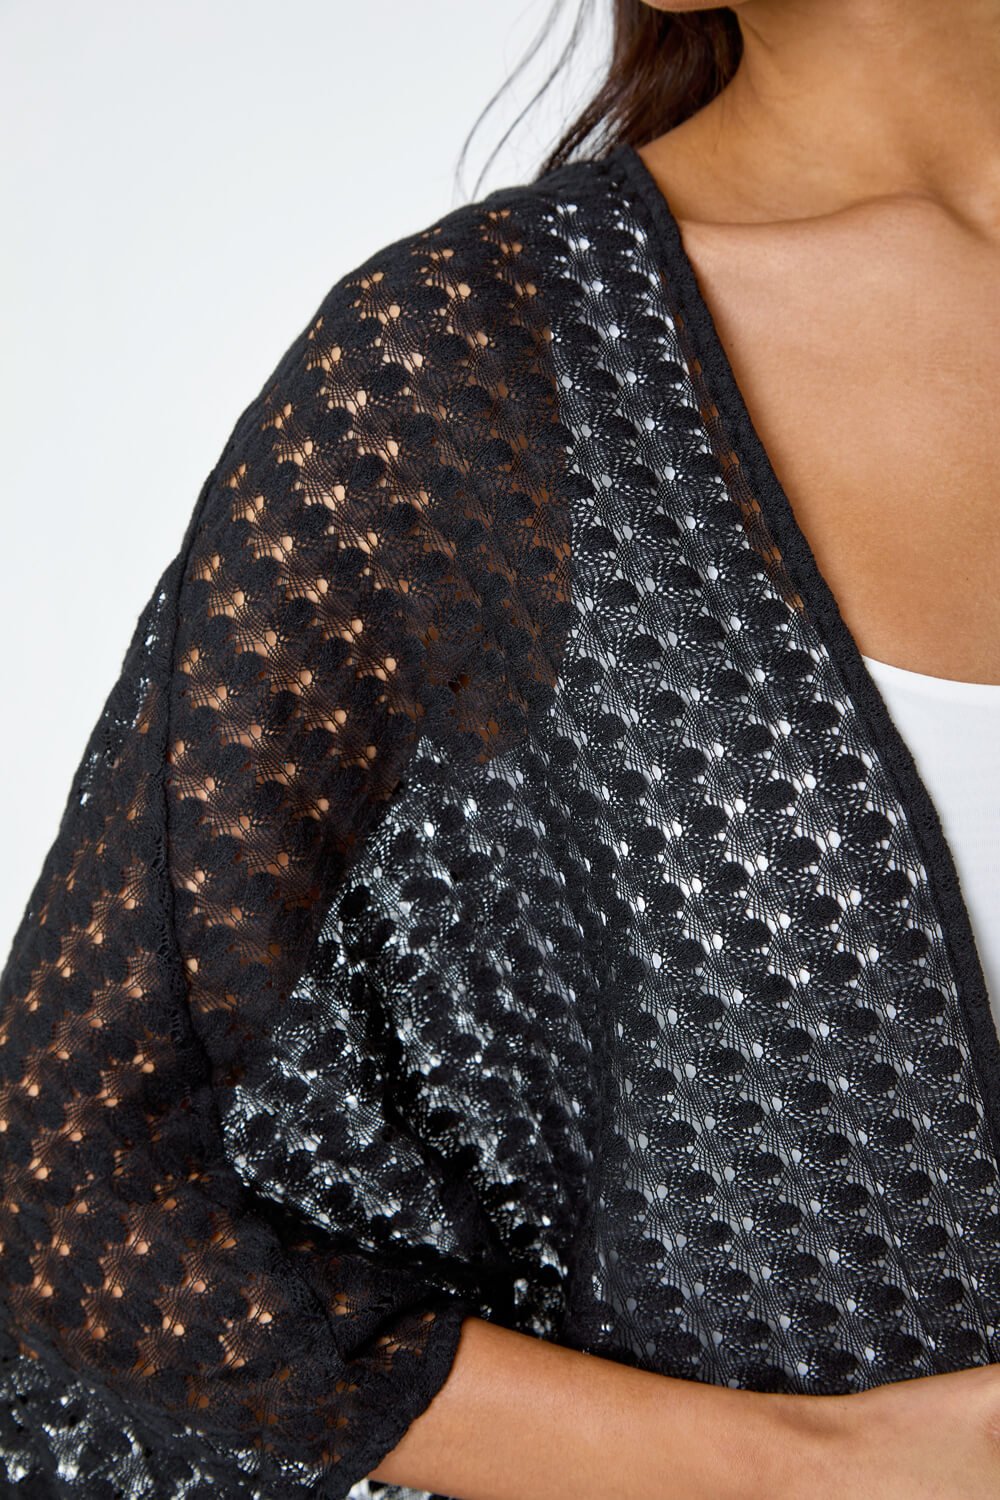 Black Textured Knit Cardigan Cover Up, Image 5 of 5